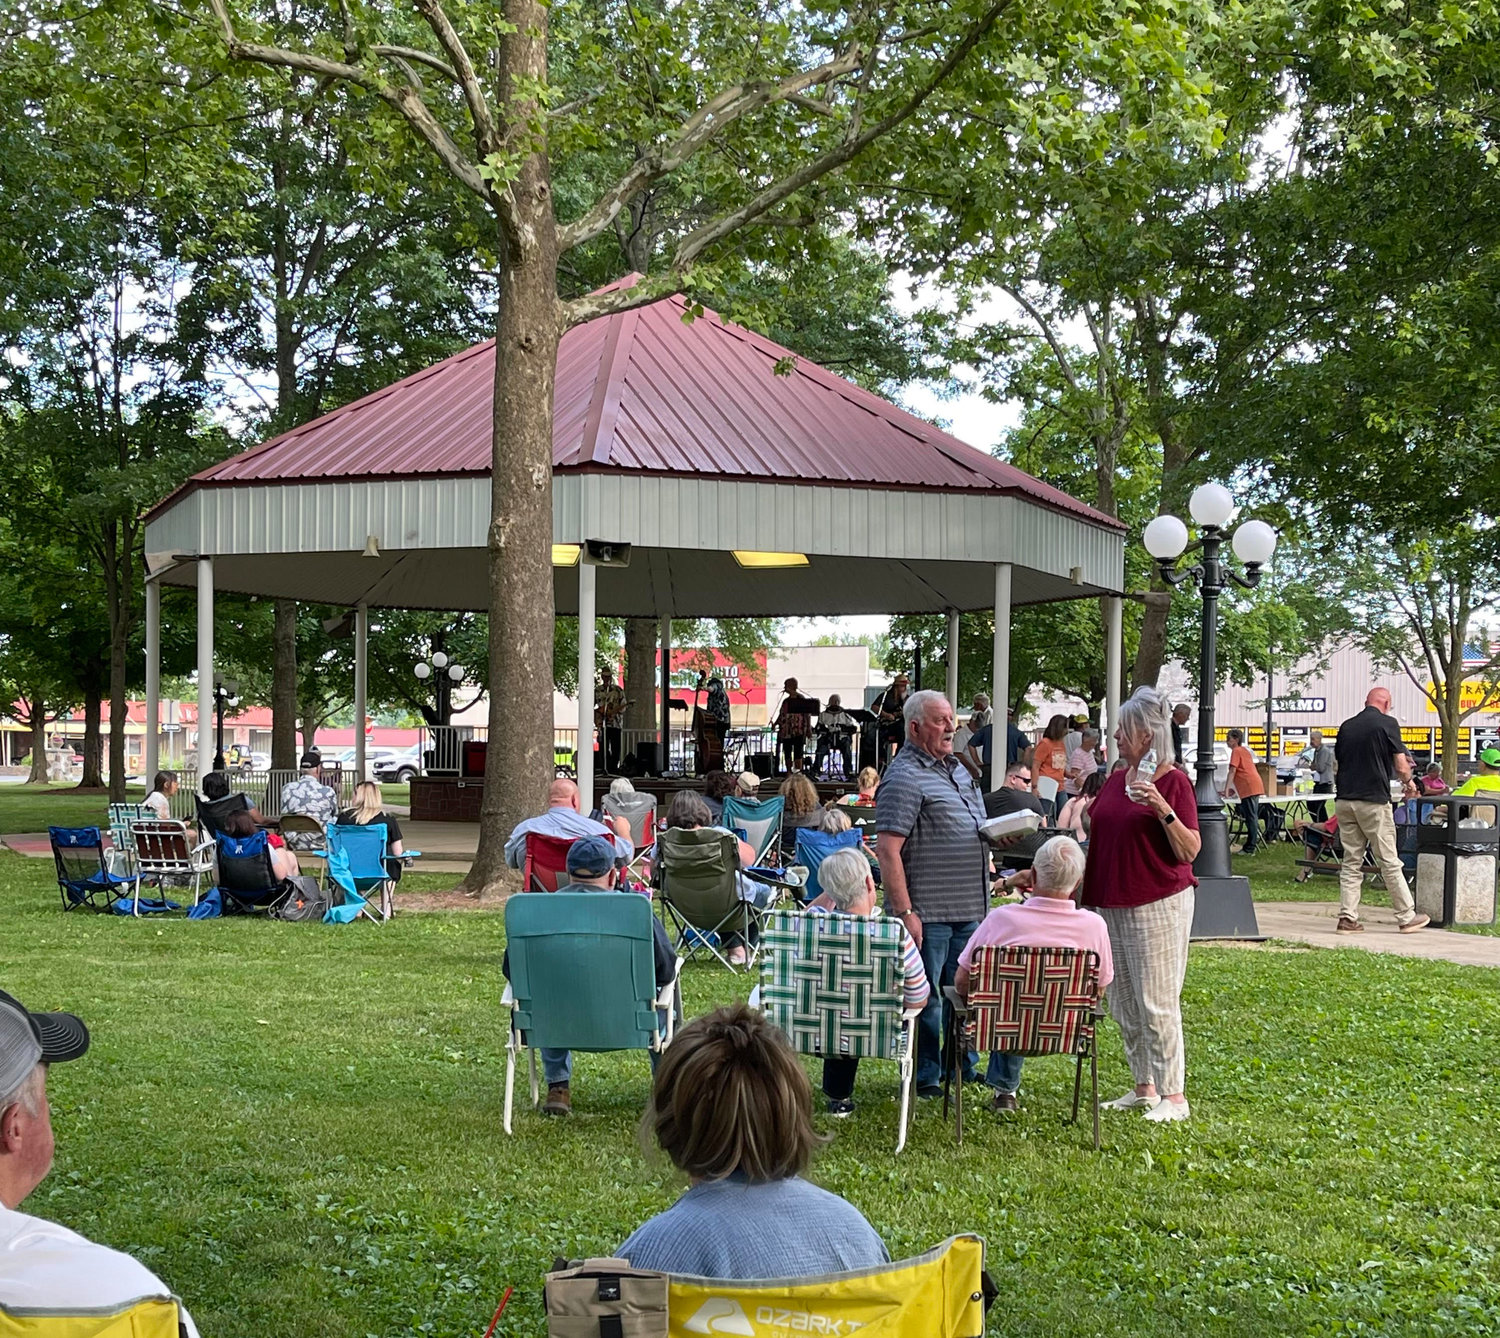 Folks from all over the county carried in lawn chairs and ate their meals from their laps while visiting with friends and listening to the band perform.